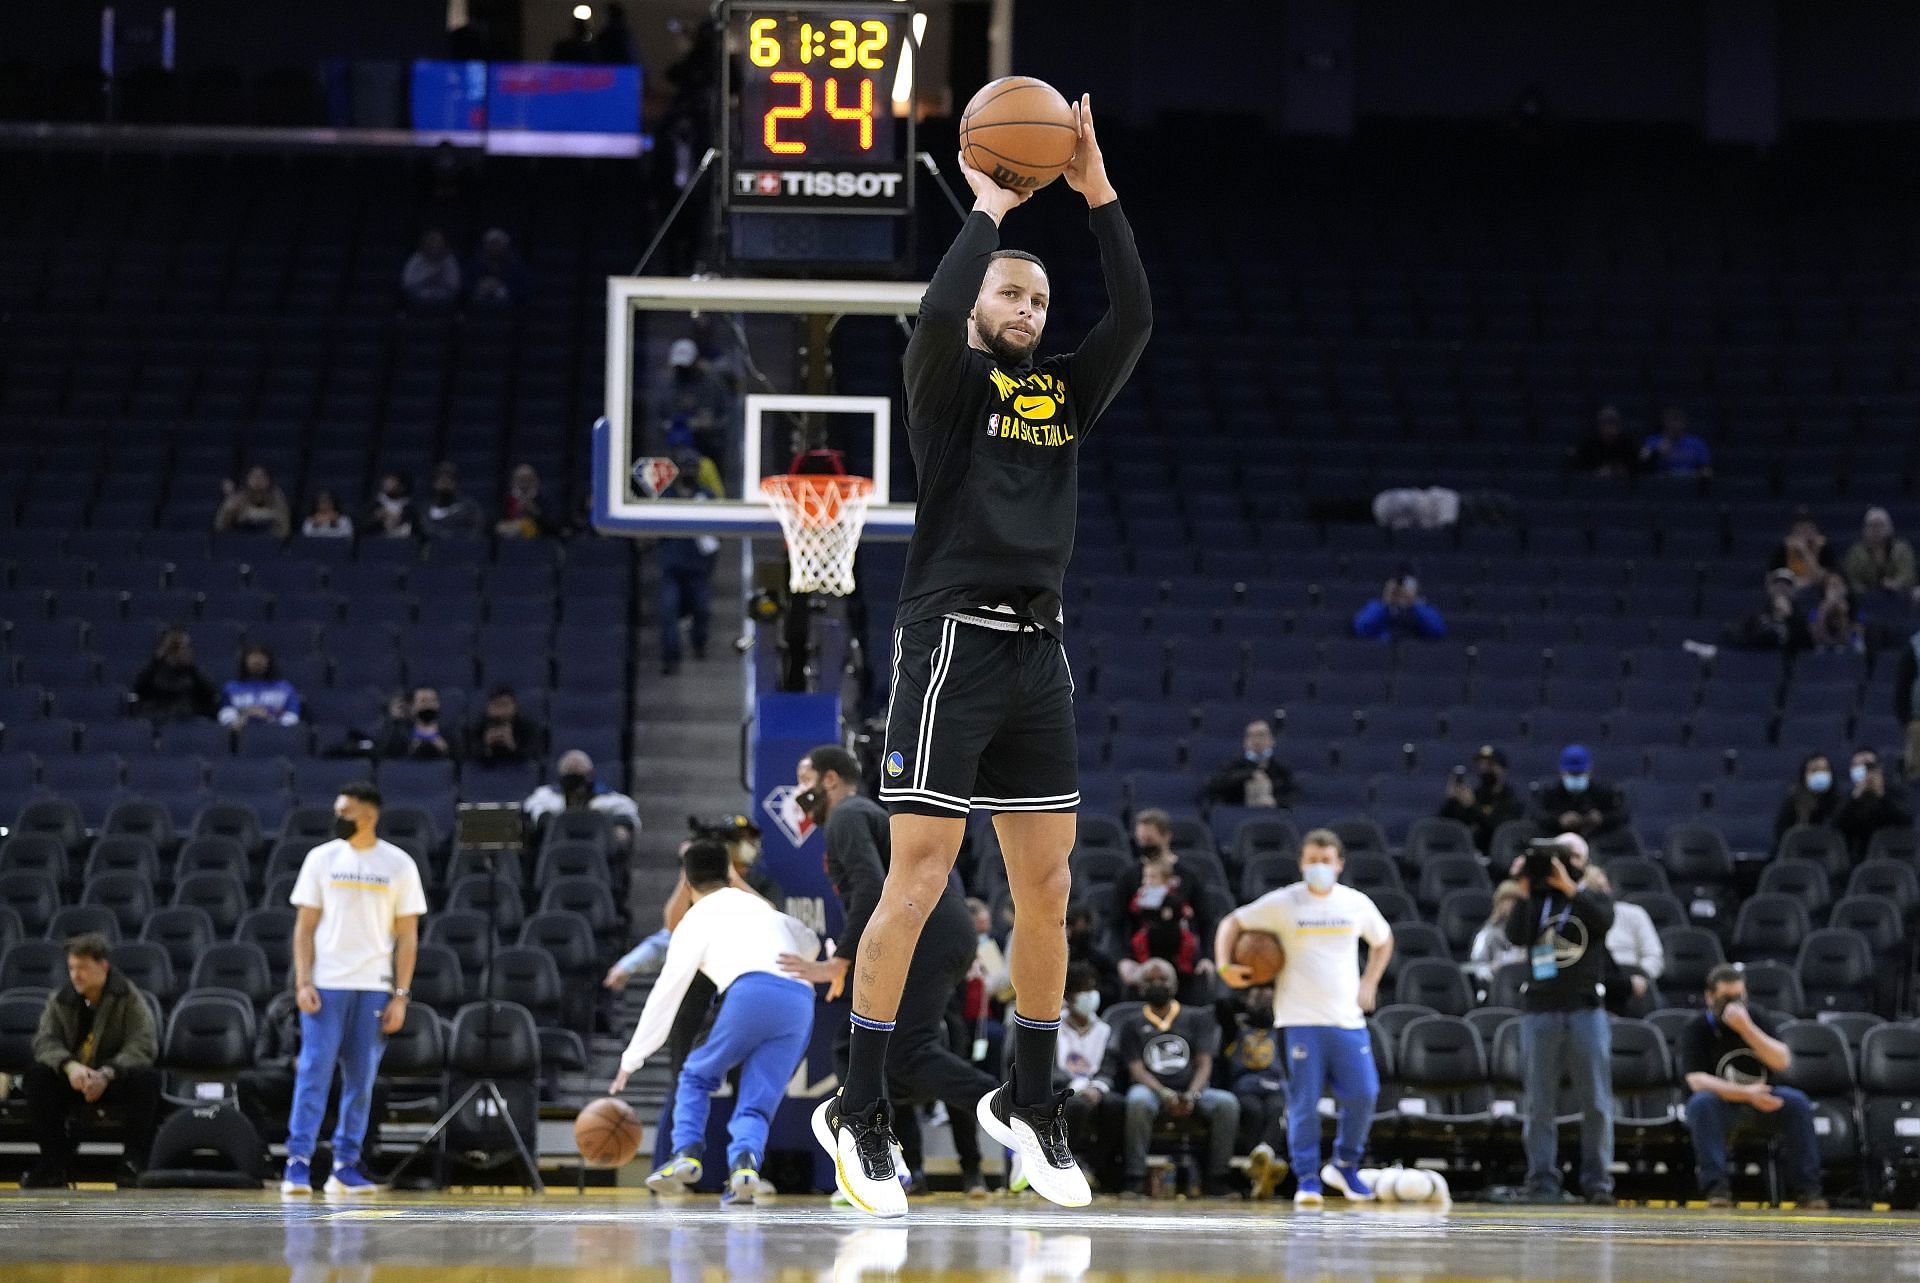 Stephen Curry of the Golden State Warriors warms up before an NBA basketball game against the Portland Trail Blazers at Chase Center on Dec. 08, 2021, in San Francisco, California.